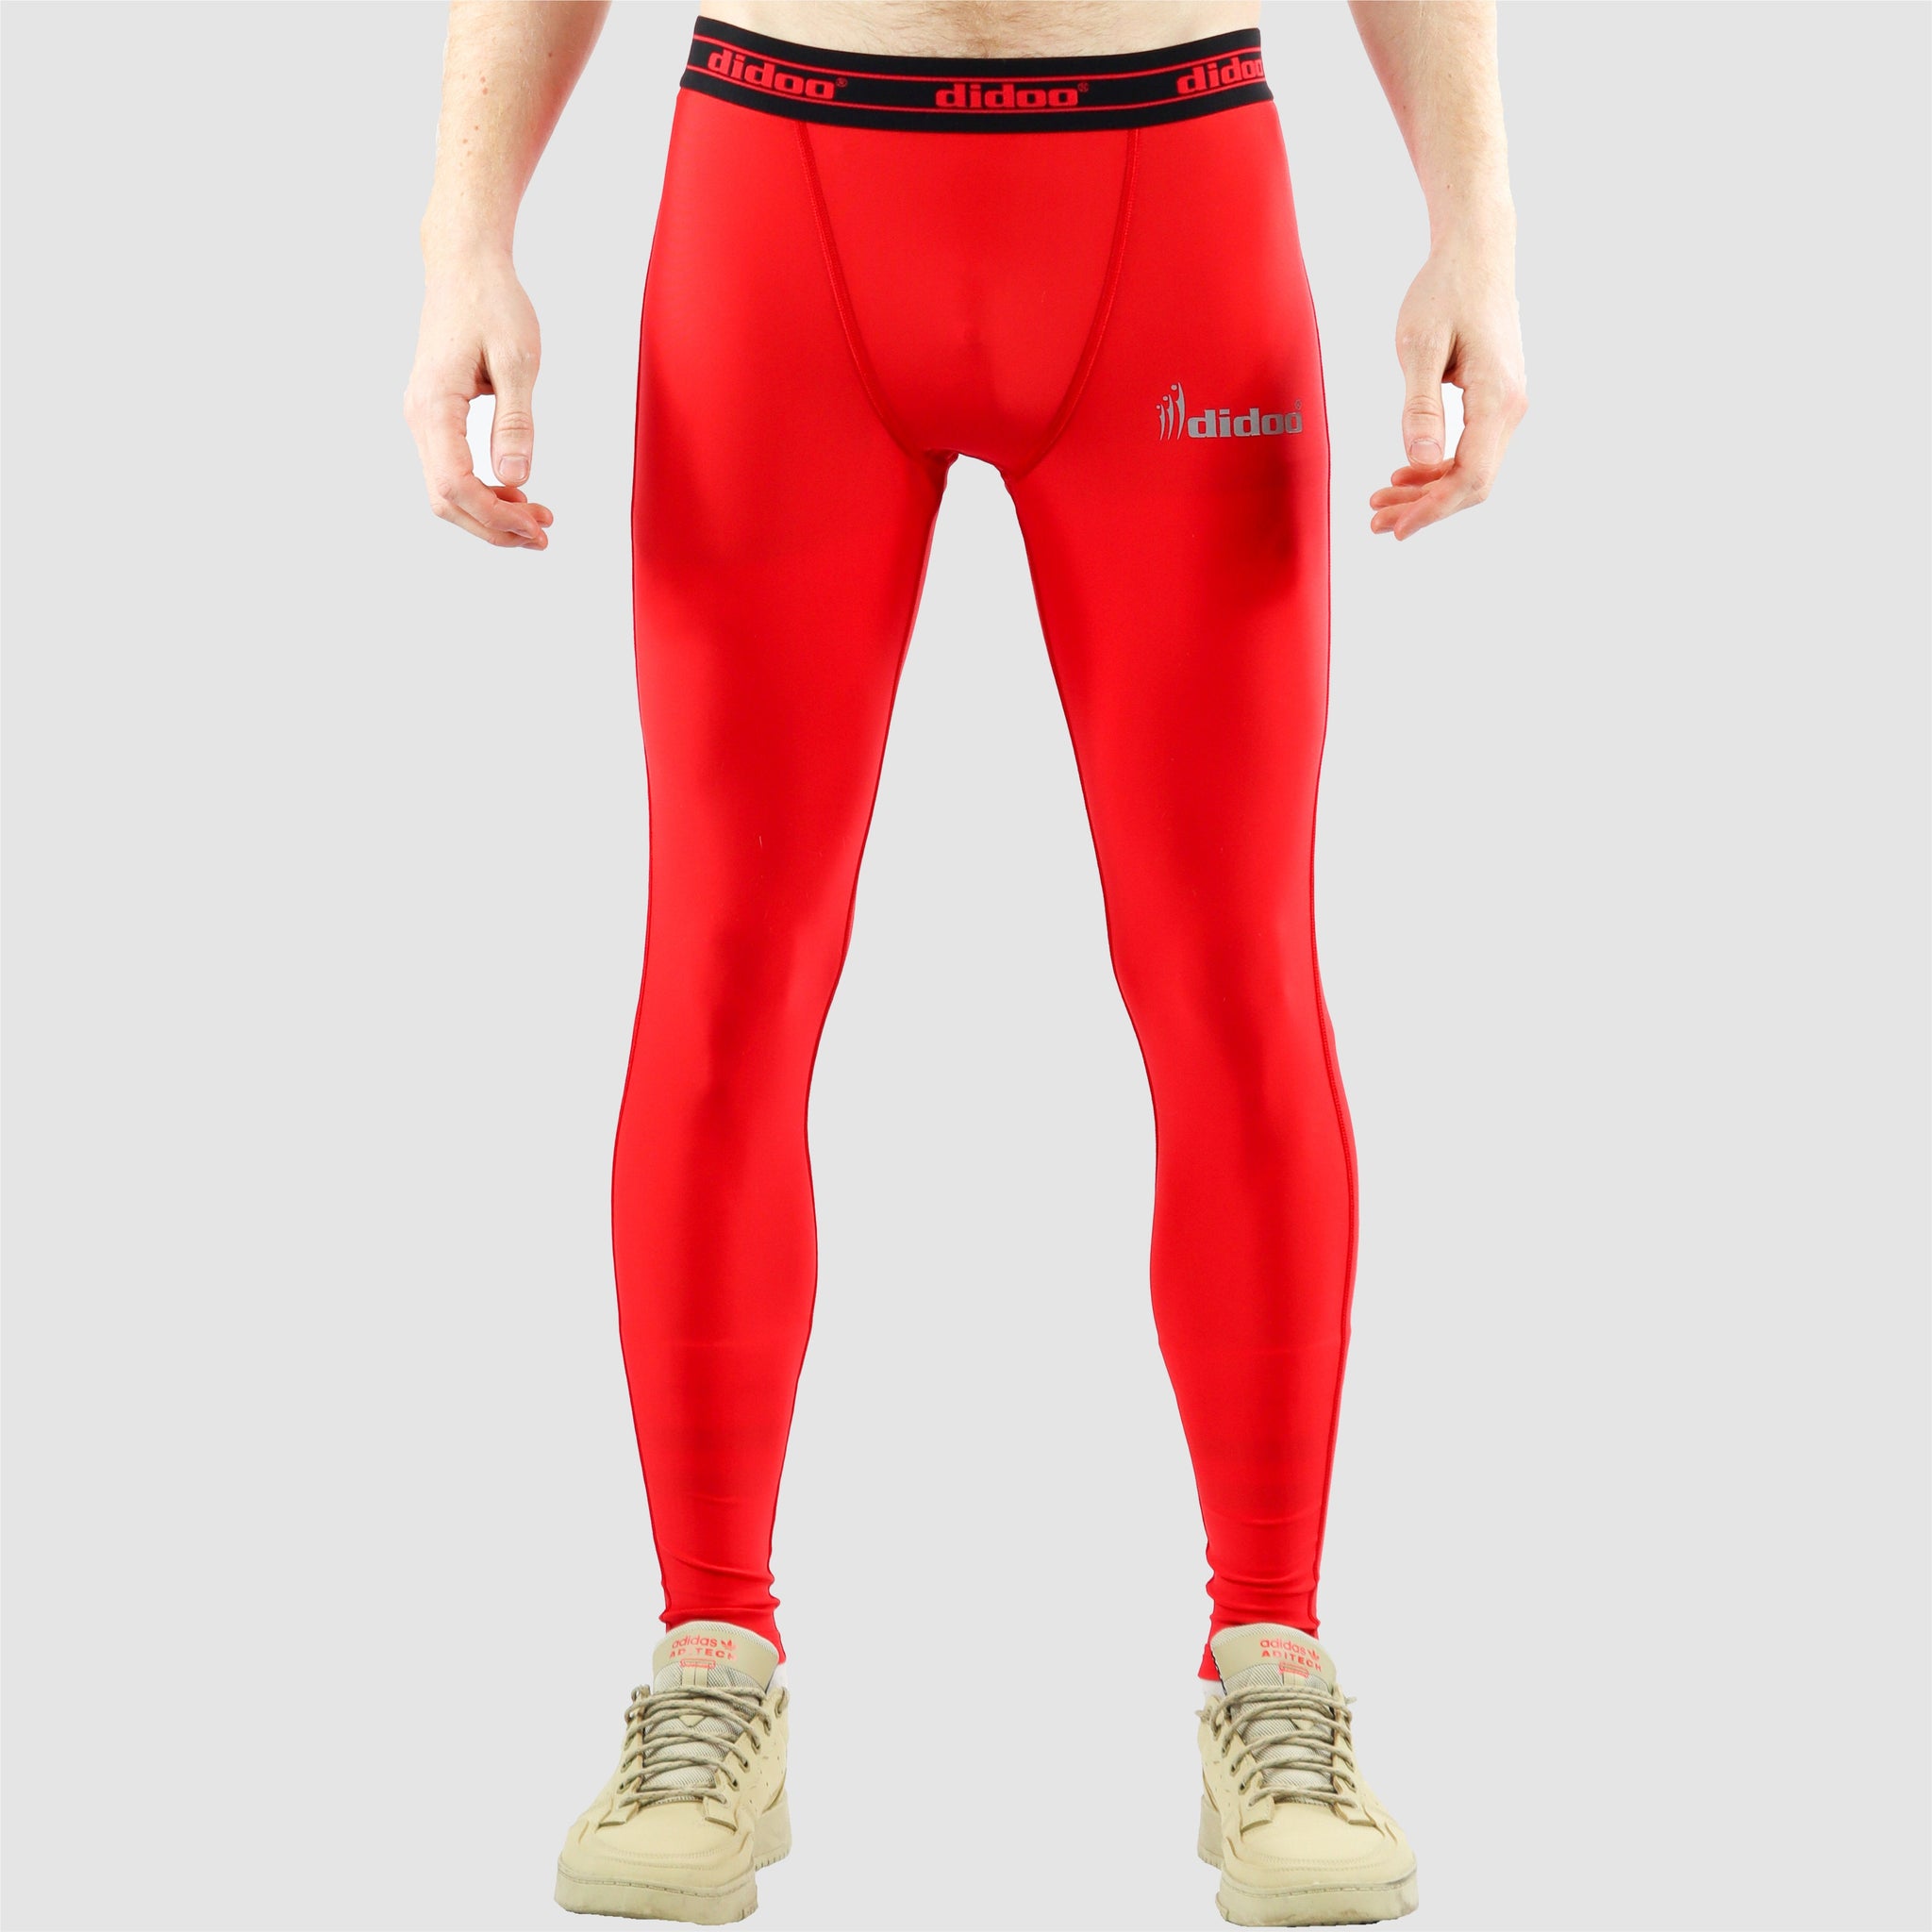 Red DiDOO Men's Compression Base Layer Leggings